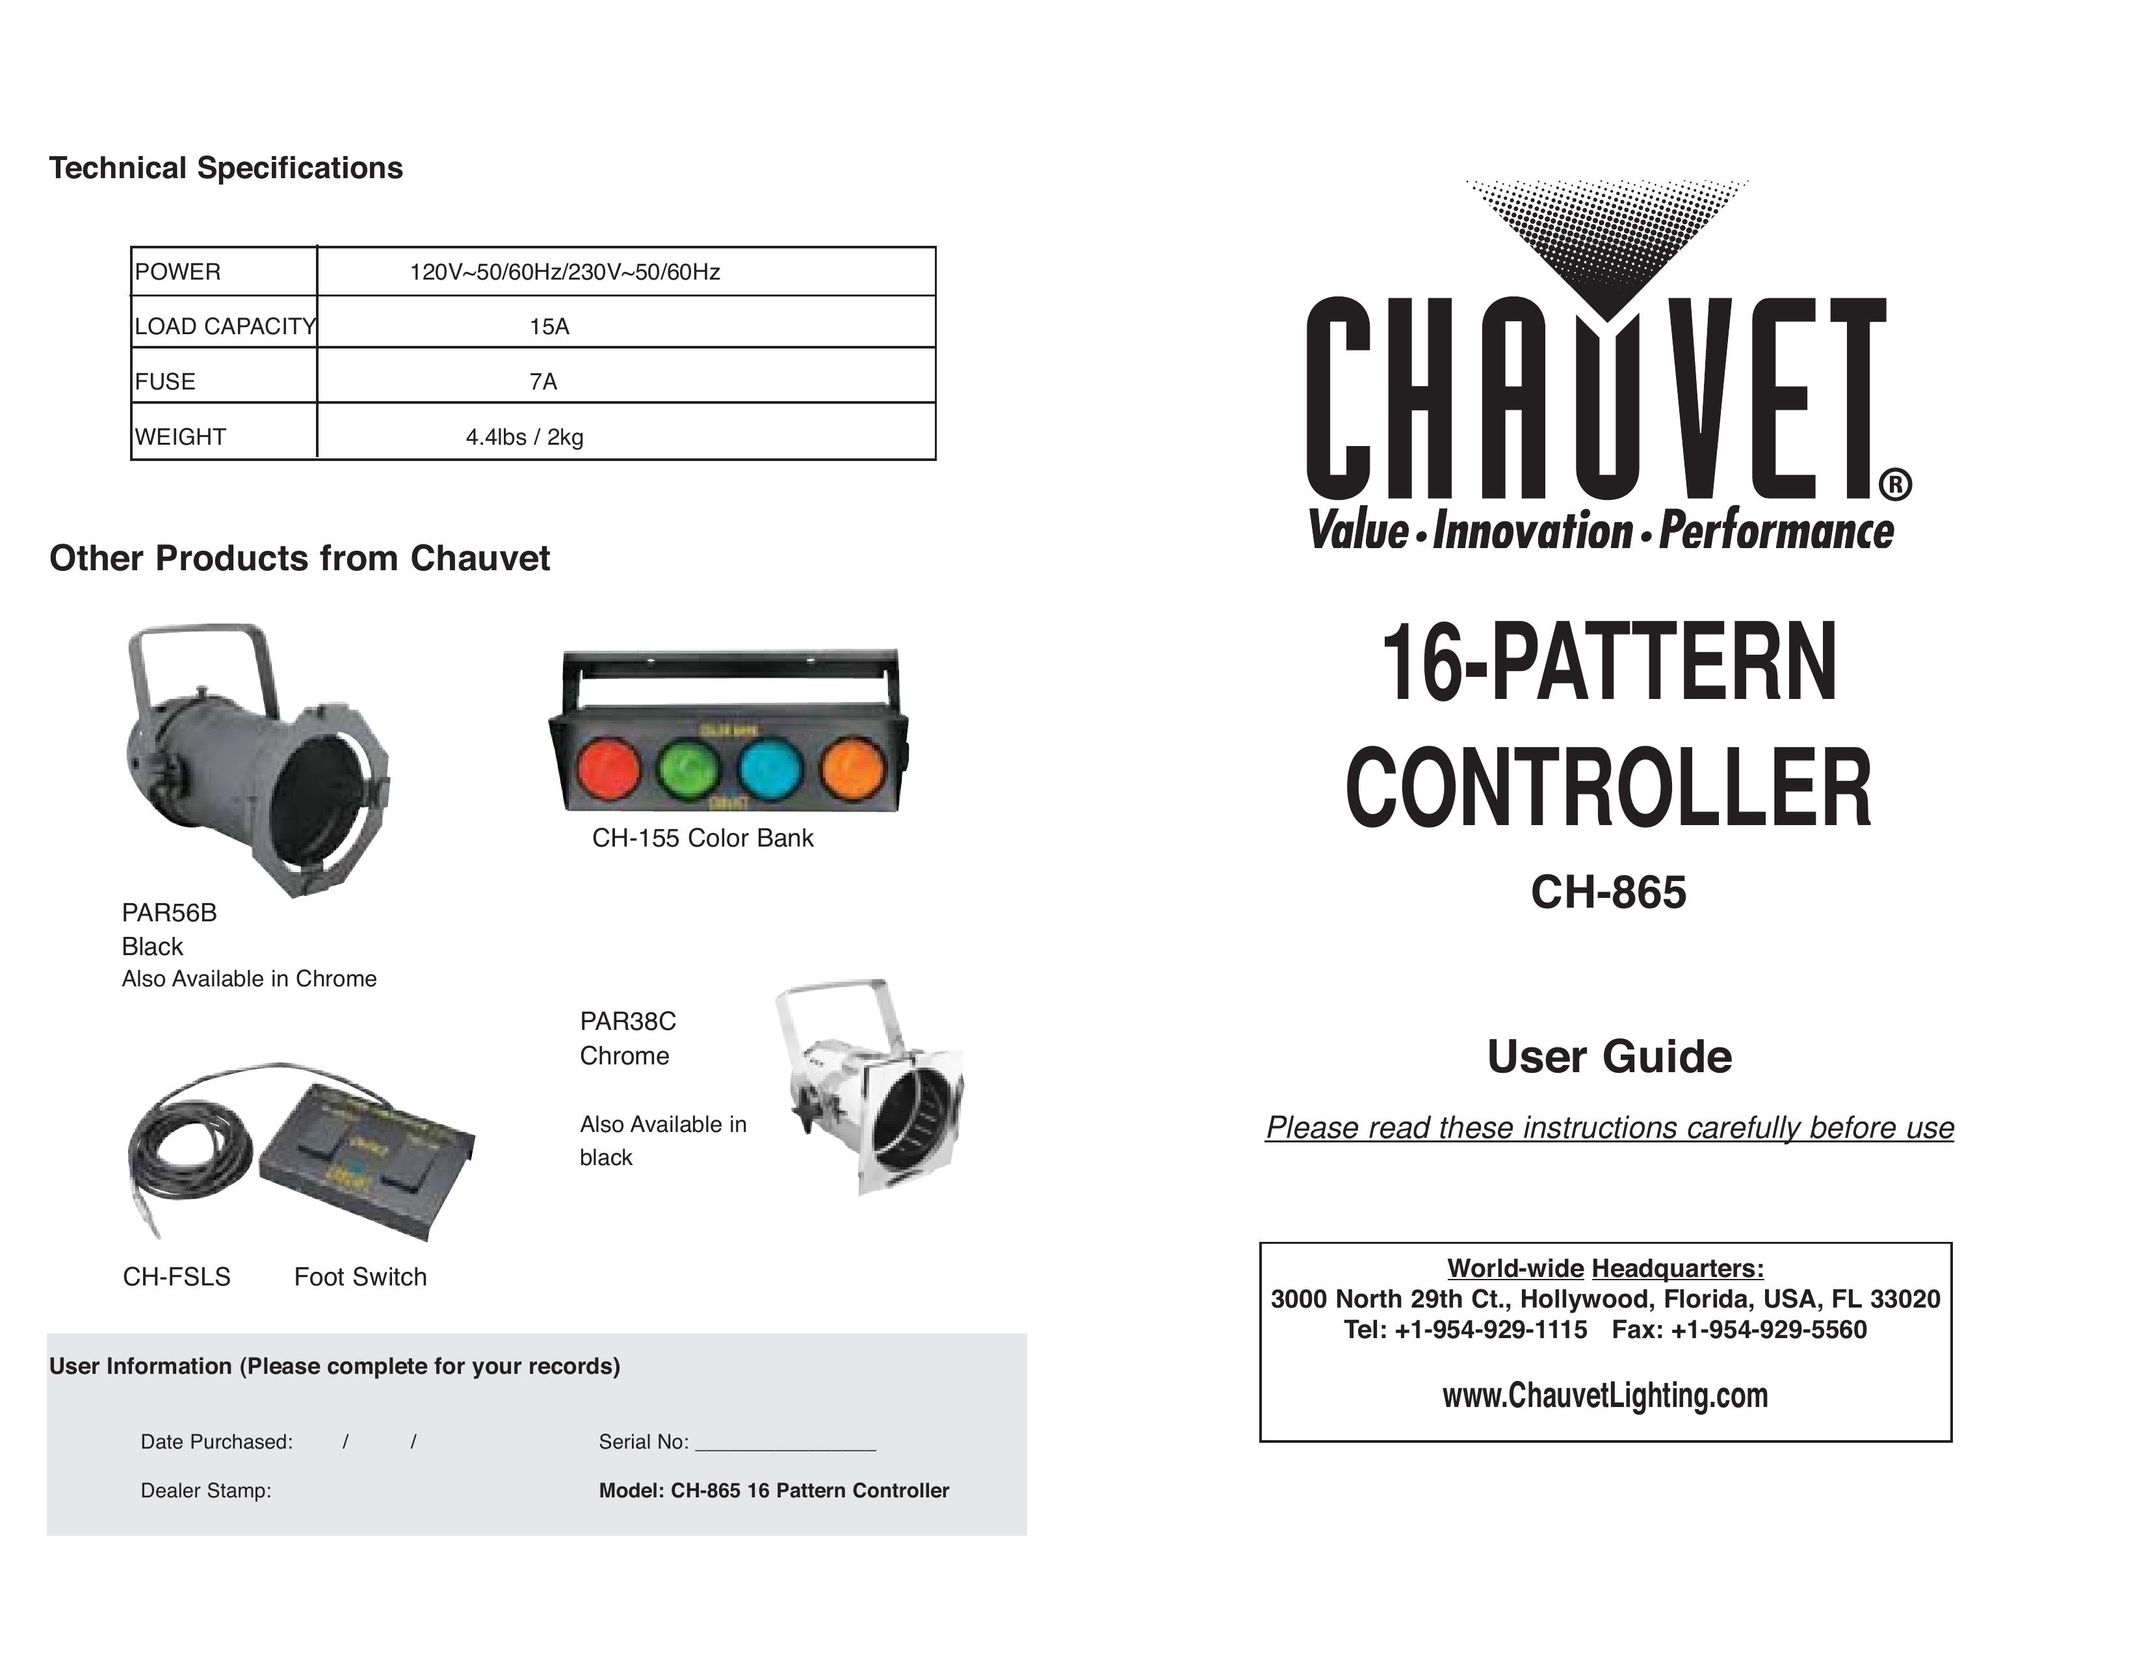 Chauvet CH-865 Indoor Furnishings User Manual